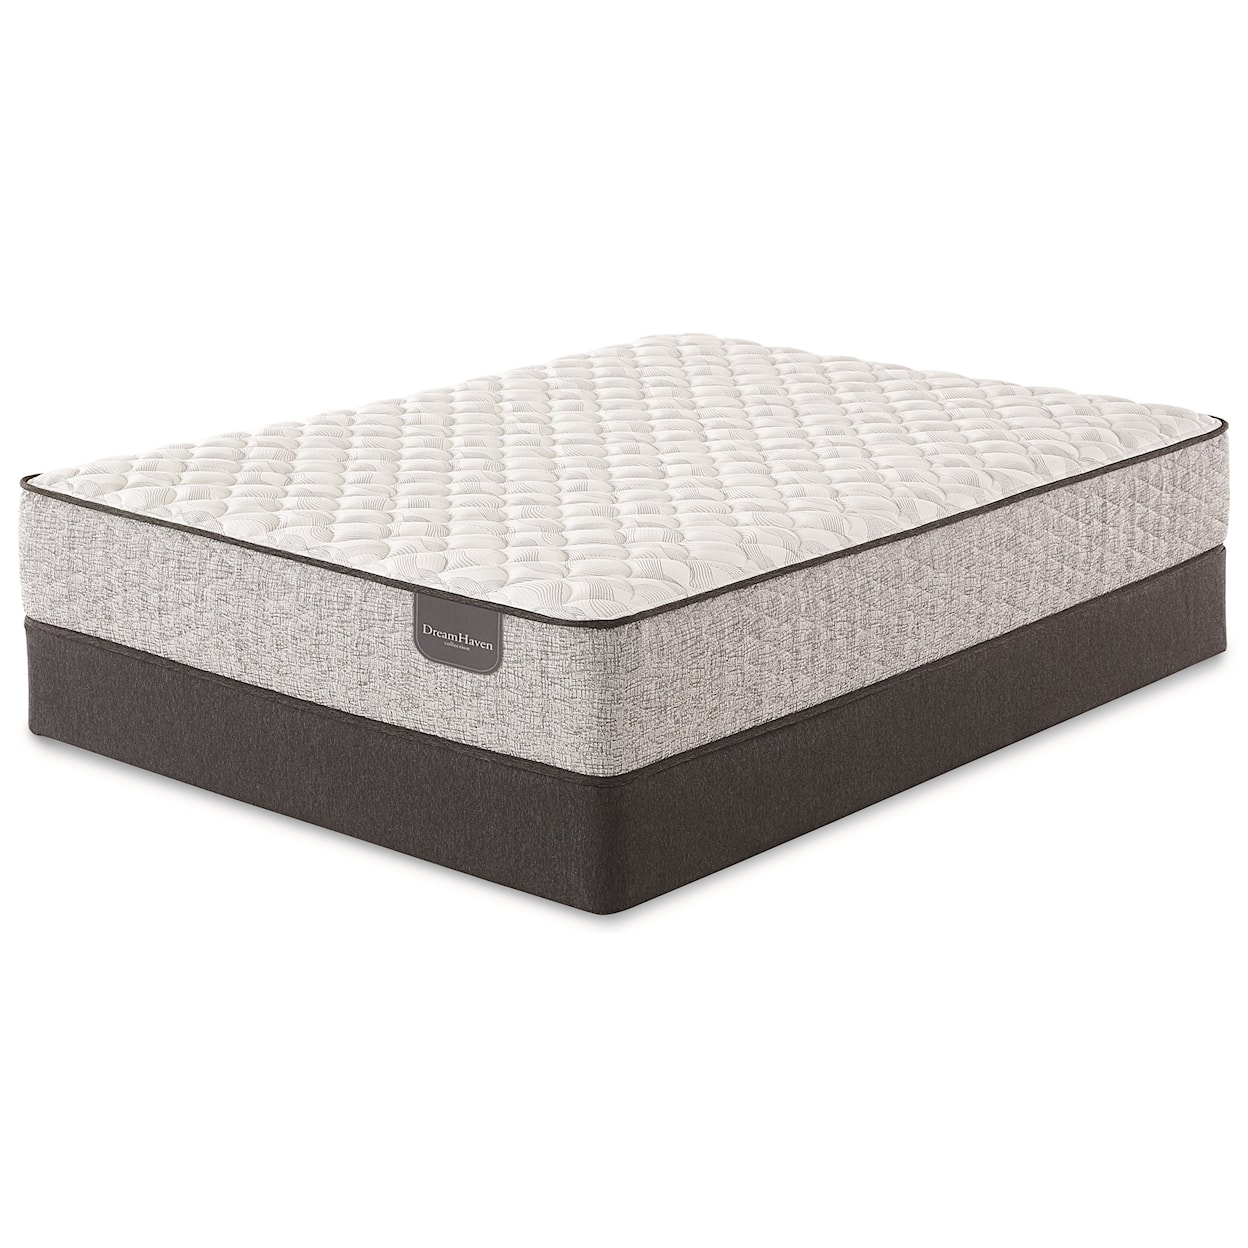 Serta Crystal Downs Firm Cal King Pocketed Coil Mattress Set